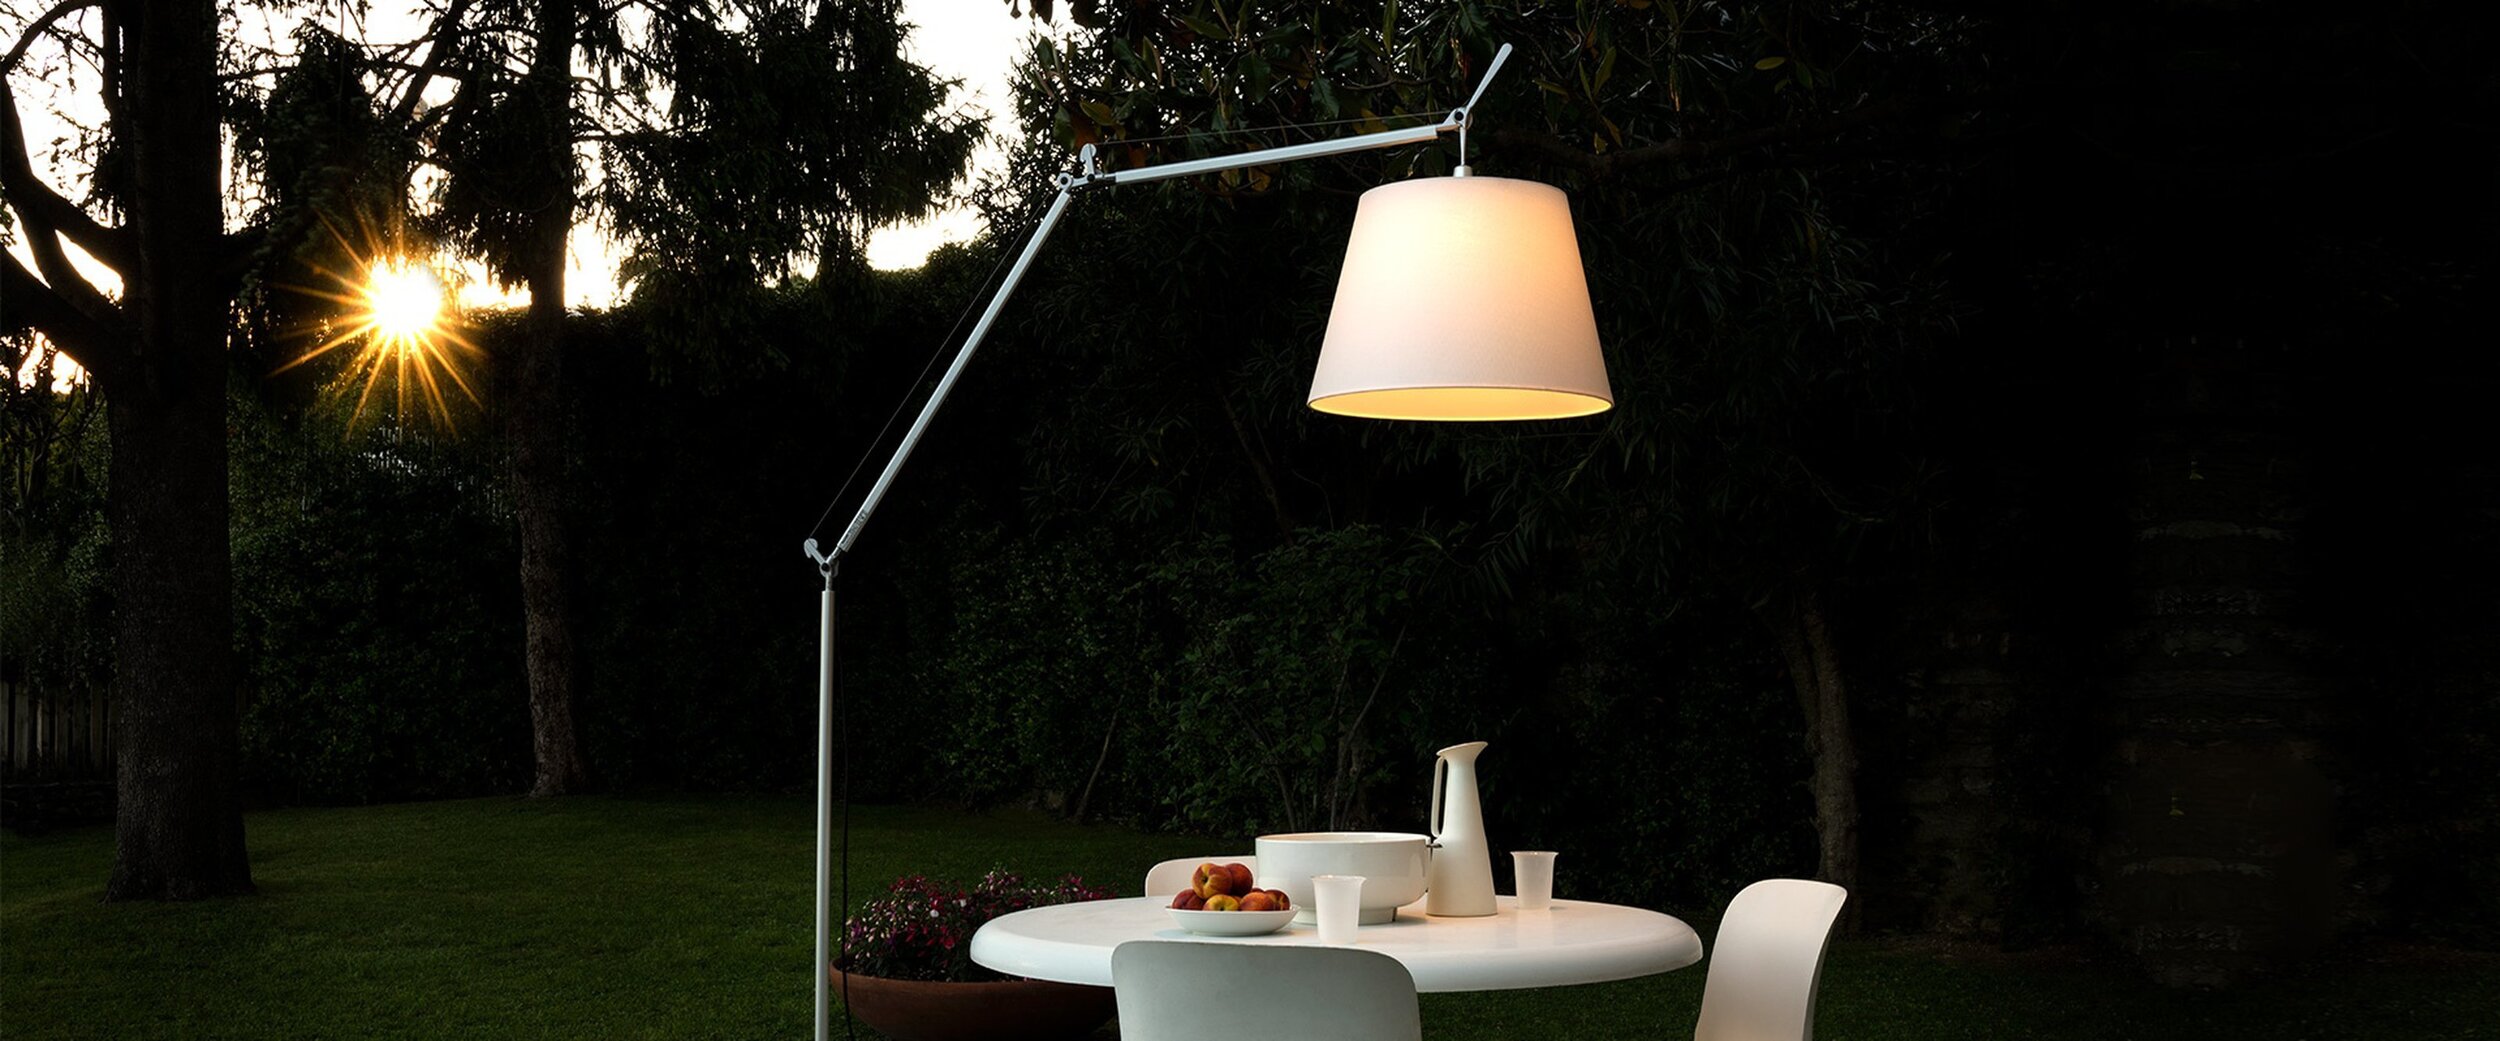 The outdoor Tolomeo Paralume by Artemide